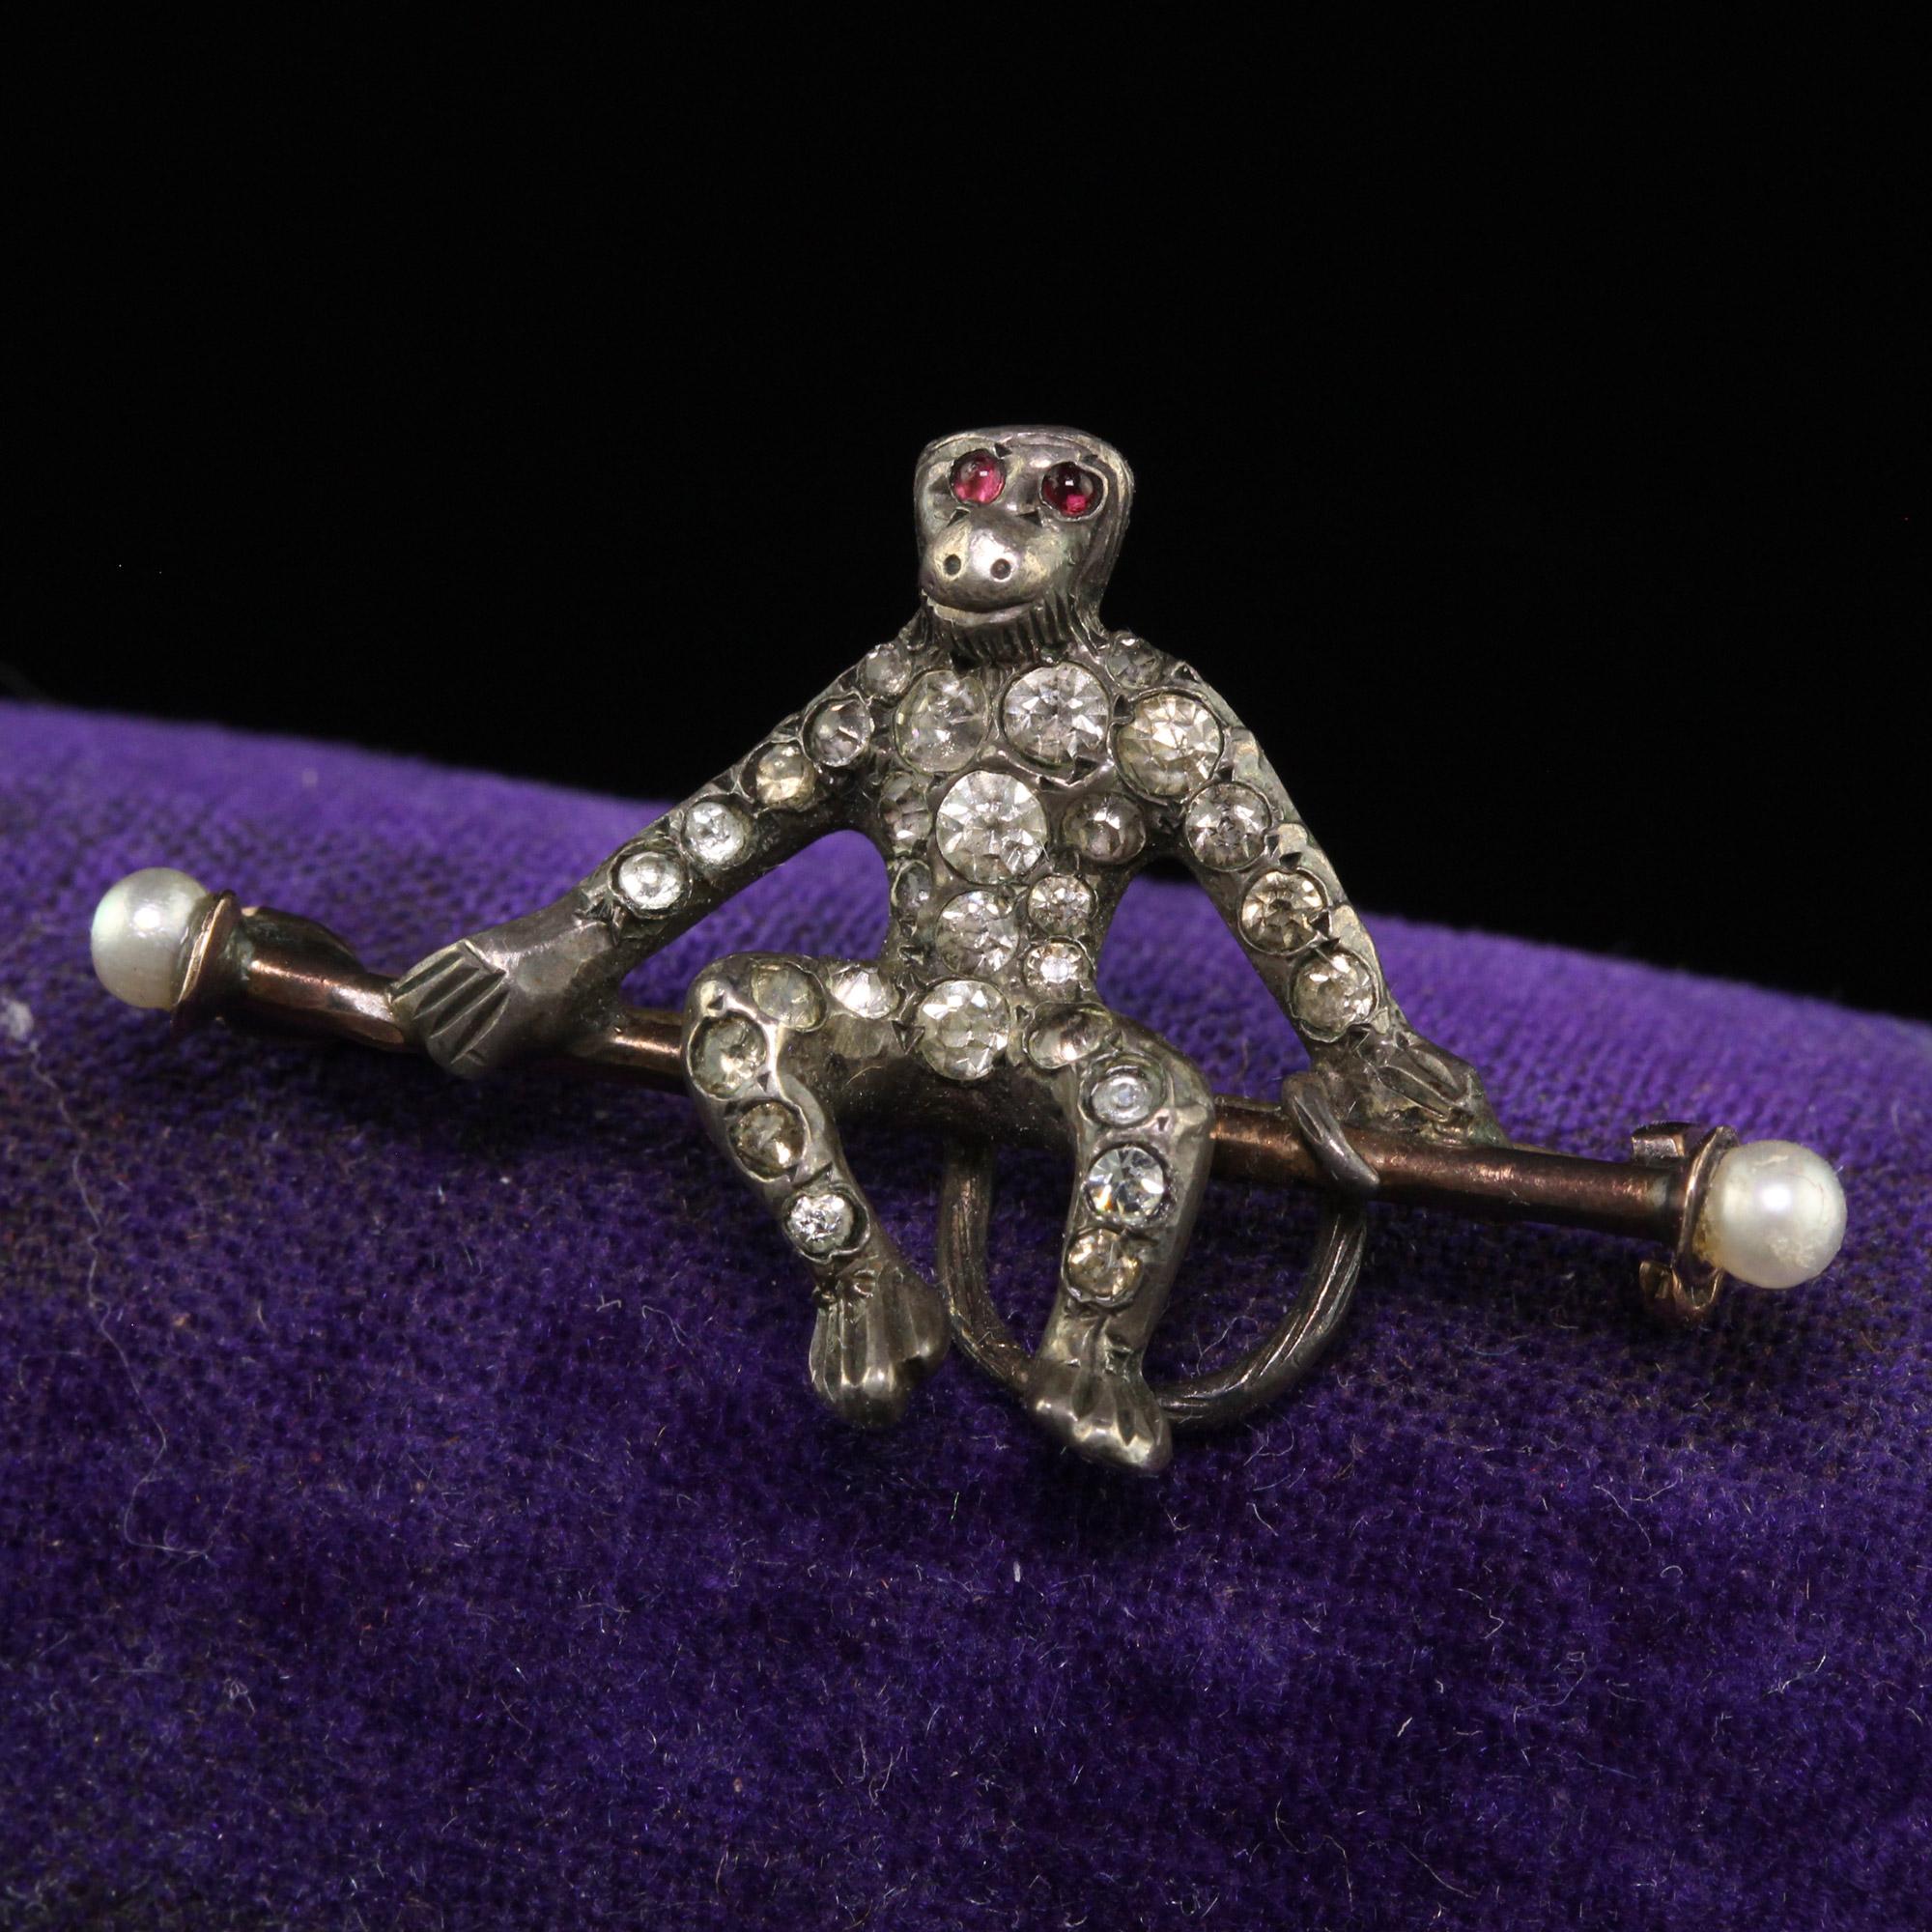 Beautiful Antique Georgian Silver Old Cut Paste and Pearl Monkey Pin. This gorgeous Georgian pin is crafted in silver. This pin features a monkey playfully sitting on a branch and has old cut diamonds set throughout its body. The branch has natural